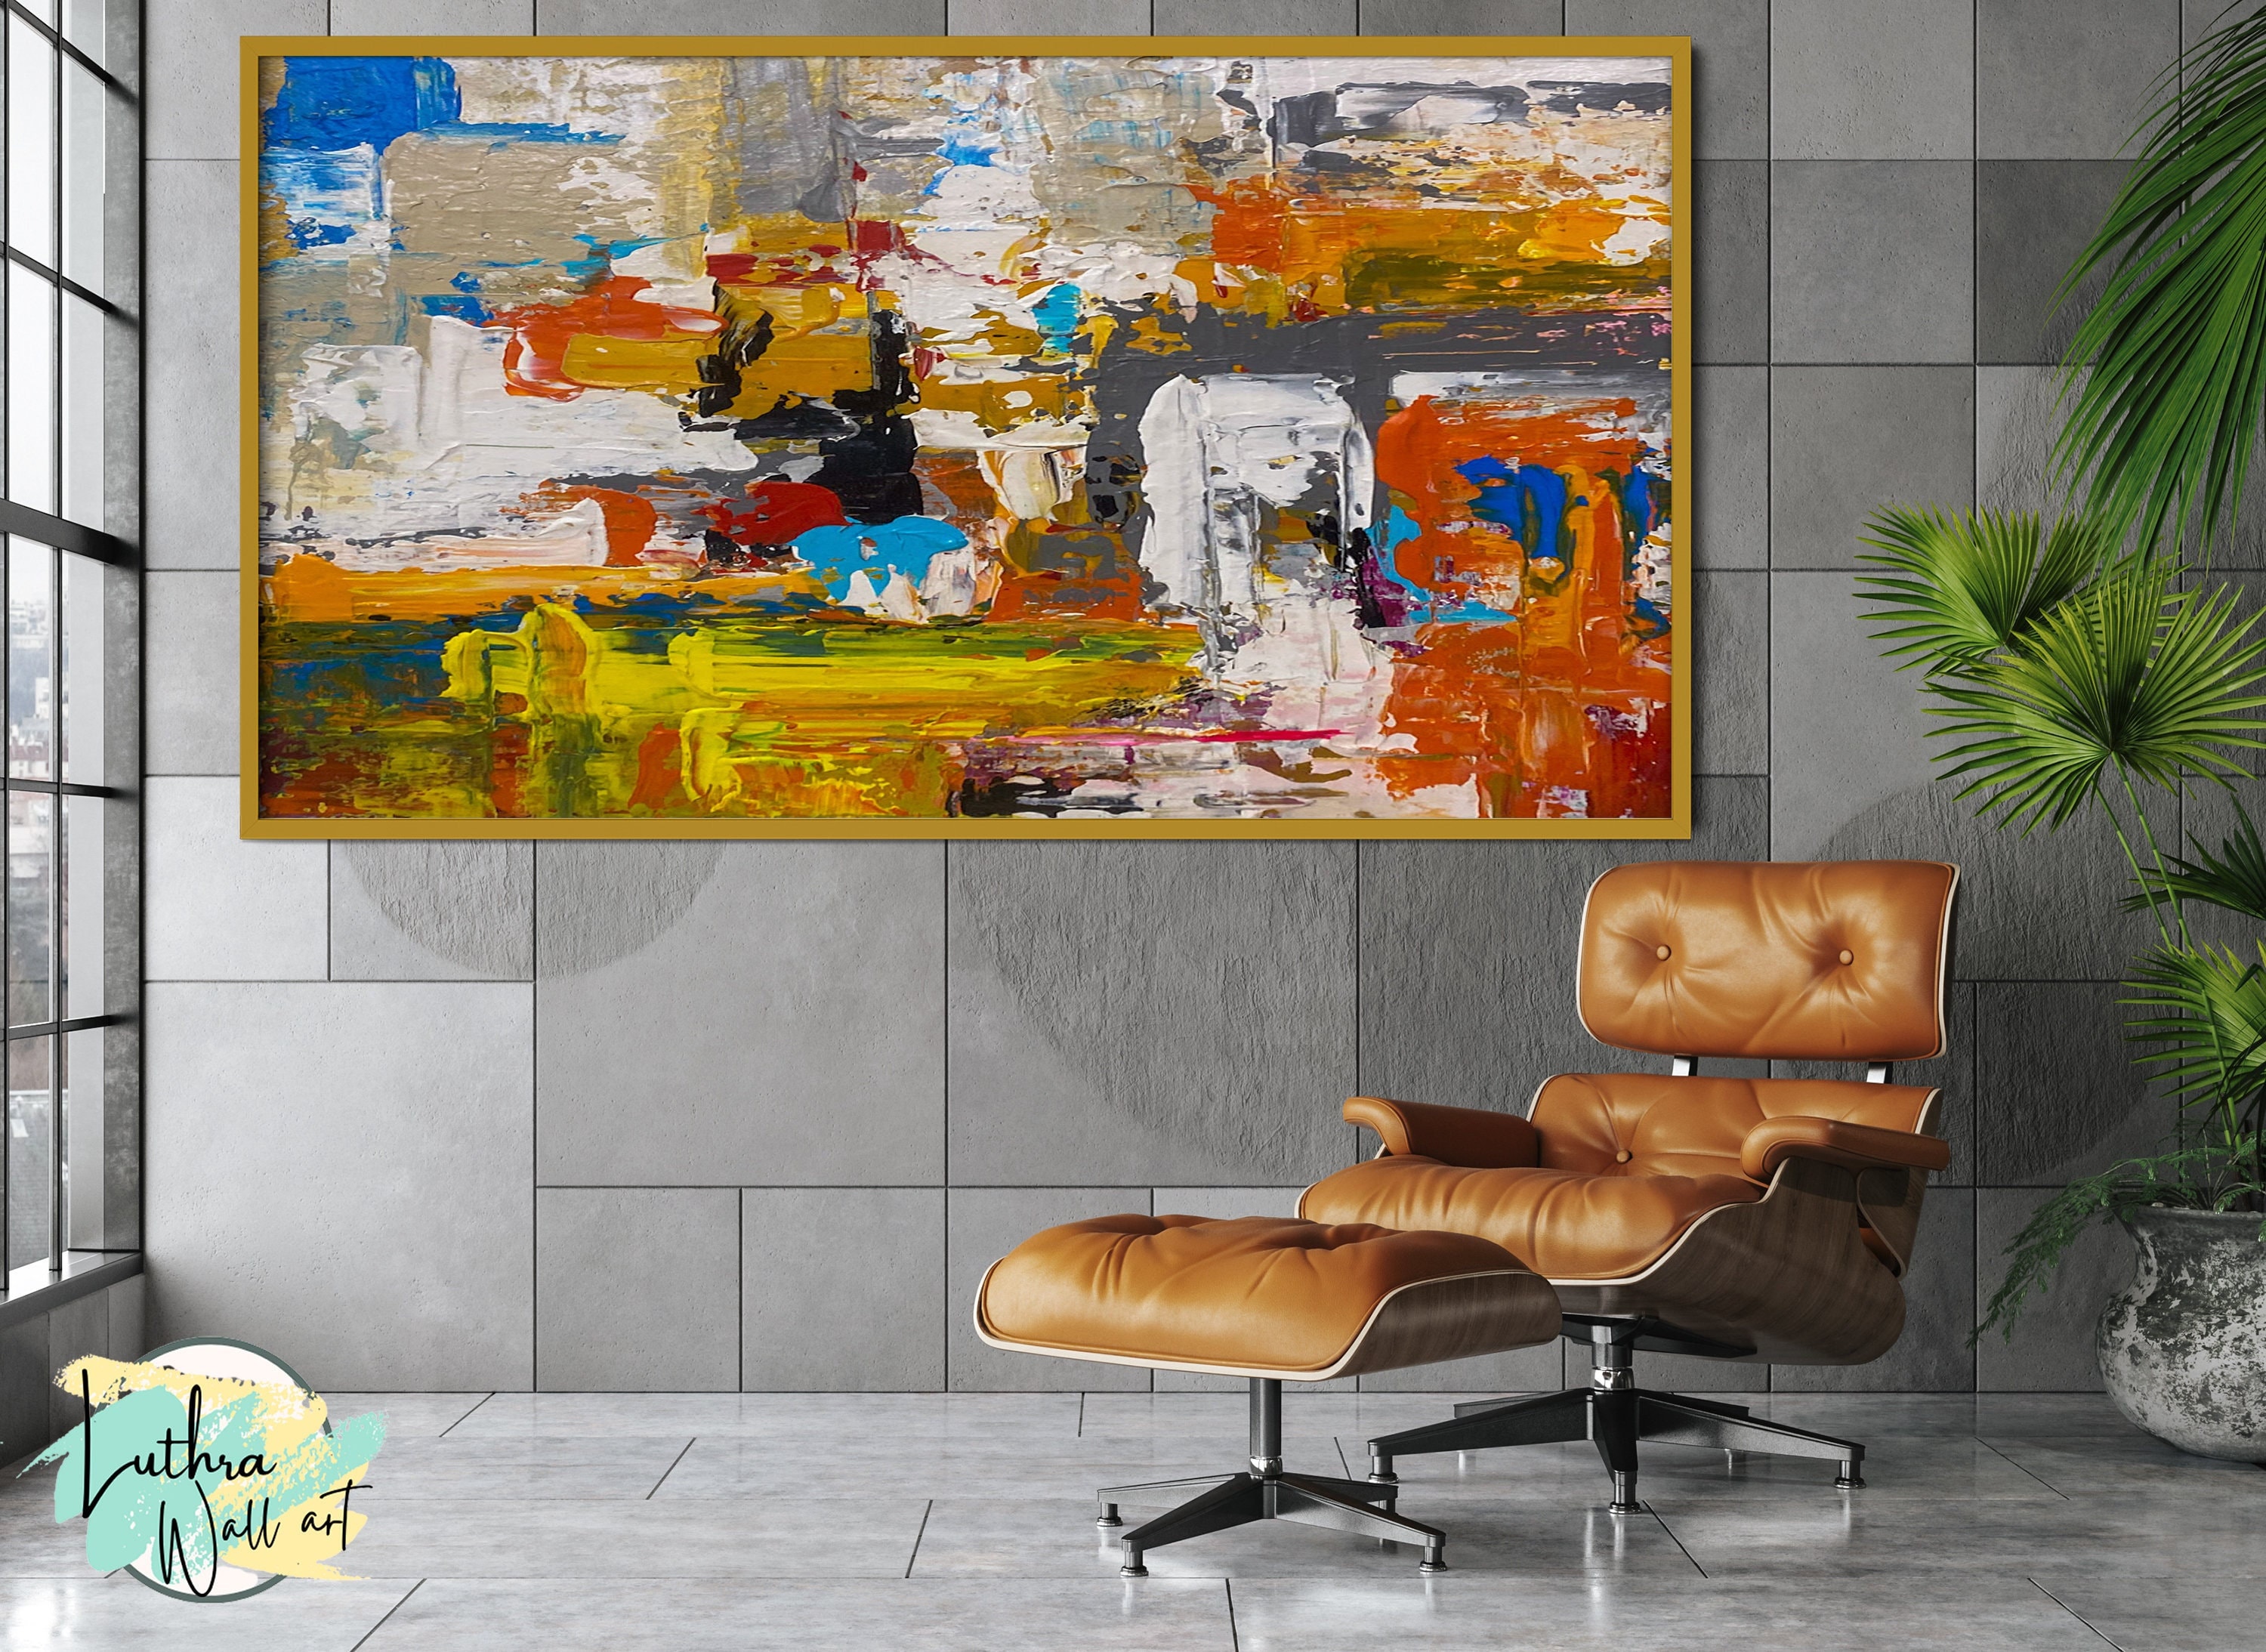 Abstract Painting Acrylic Painting Art Panting Multi Colour Trees Large  Canvas Wall Art Home Office Decor Modern Palette Knife Visi Custom 